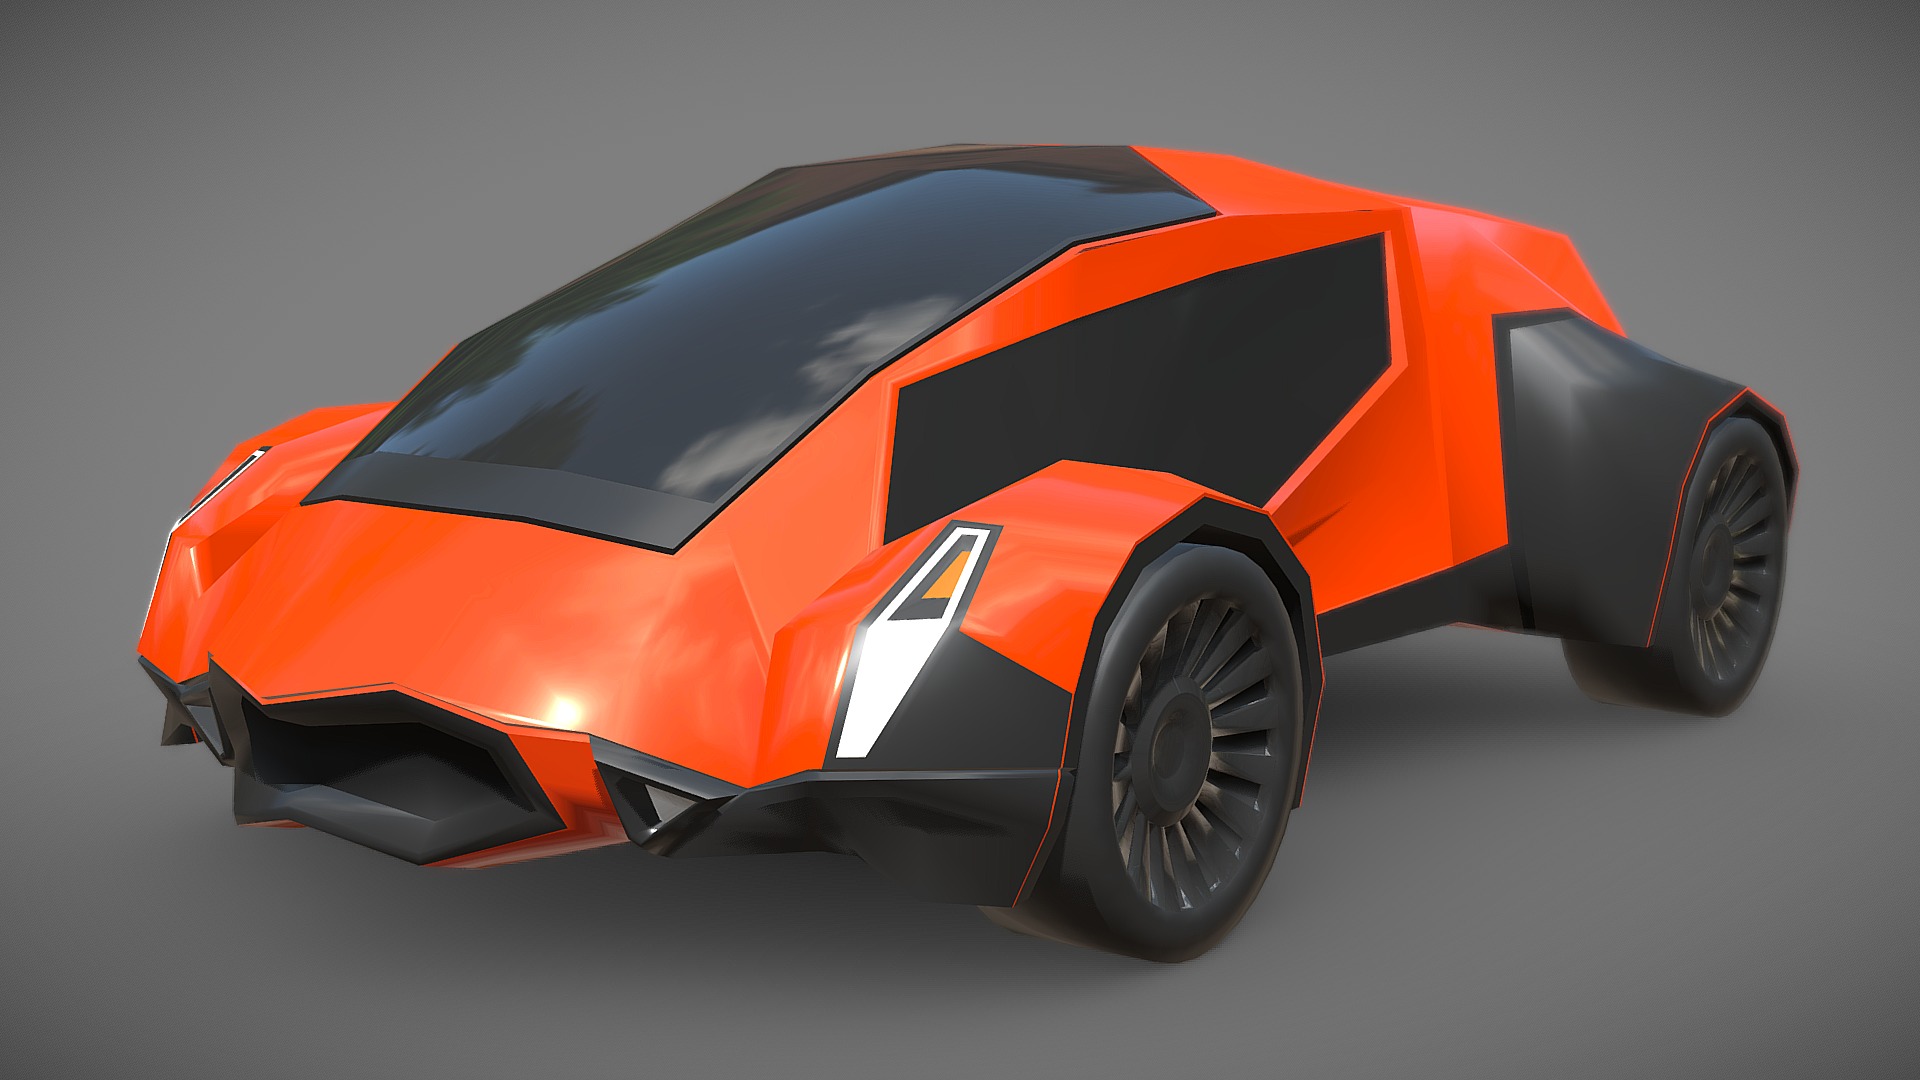 3D model Lowpoly futuristic vehicle - This is a 3D model of the Lowpoly futuristic vehicle. The 3D model is about a red and black sports car.